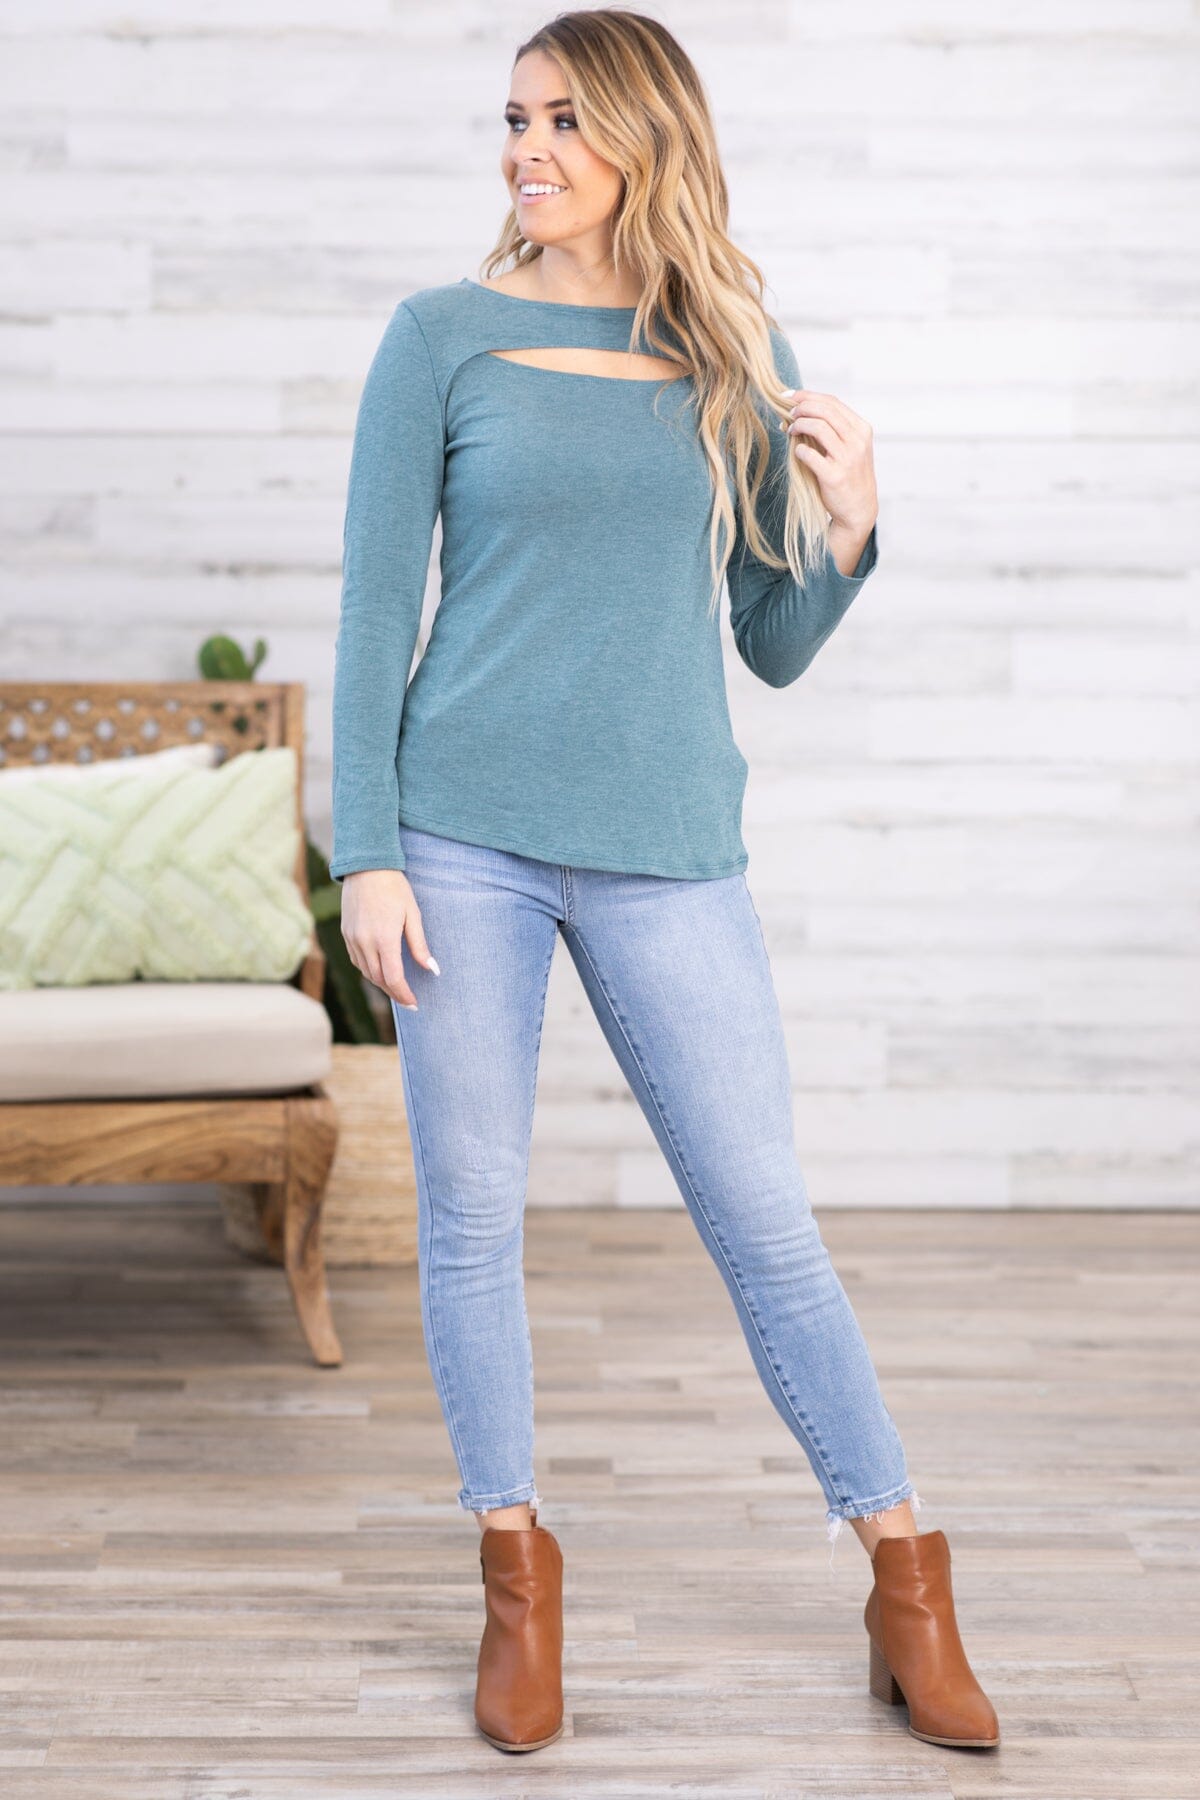 Teal Long Sleeve Top With Cutout Detail - Filly Flair